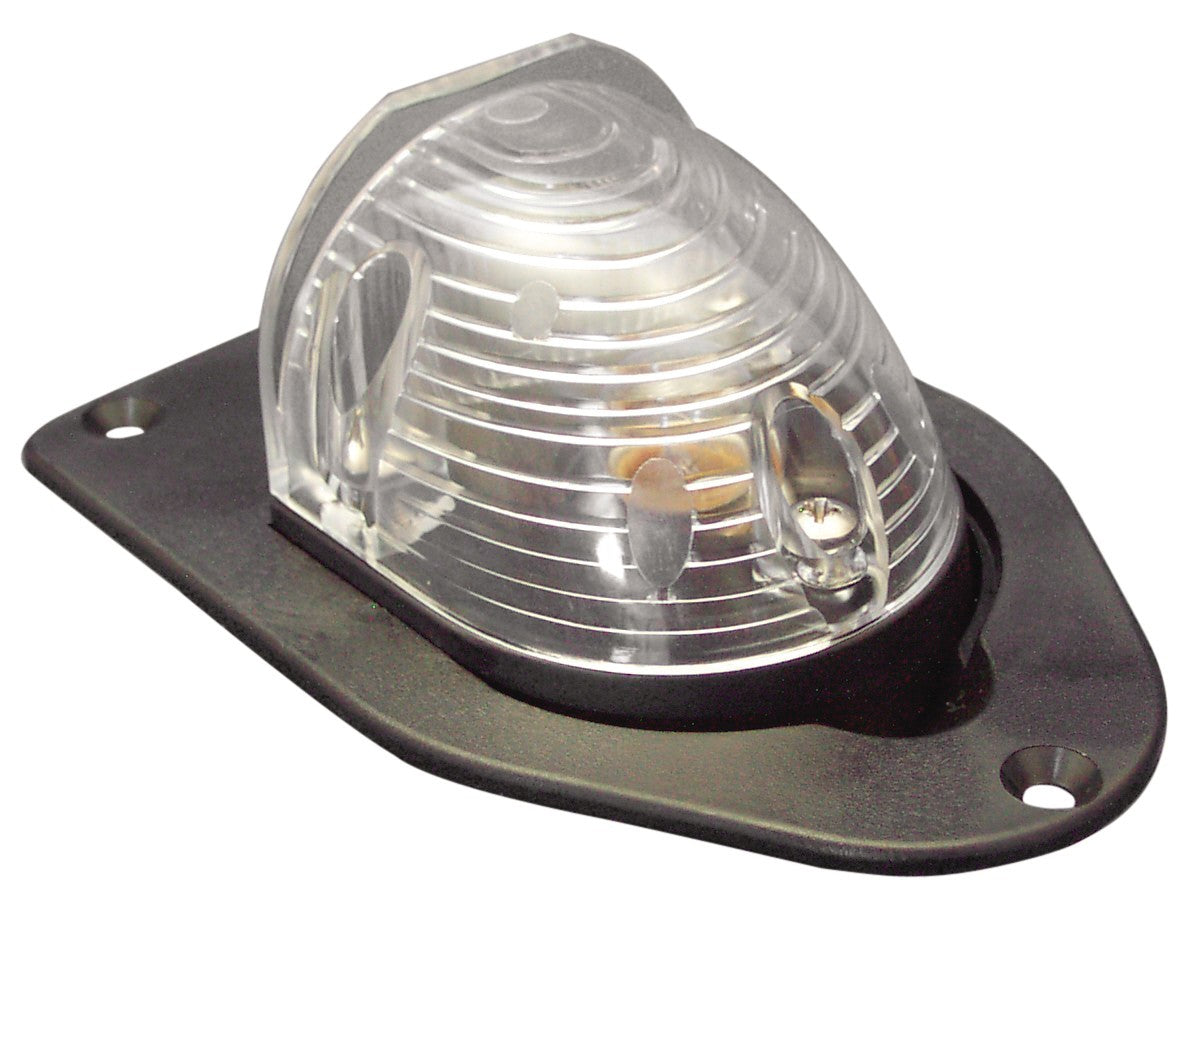 GAFFRIG PART #5905 POPUP STAINLESS STEEL STERN LIGHT LED ROUND